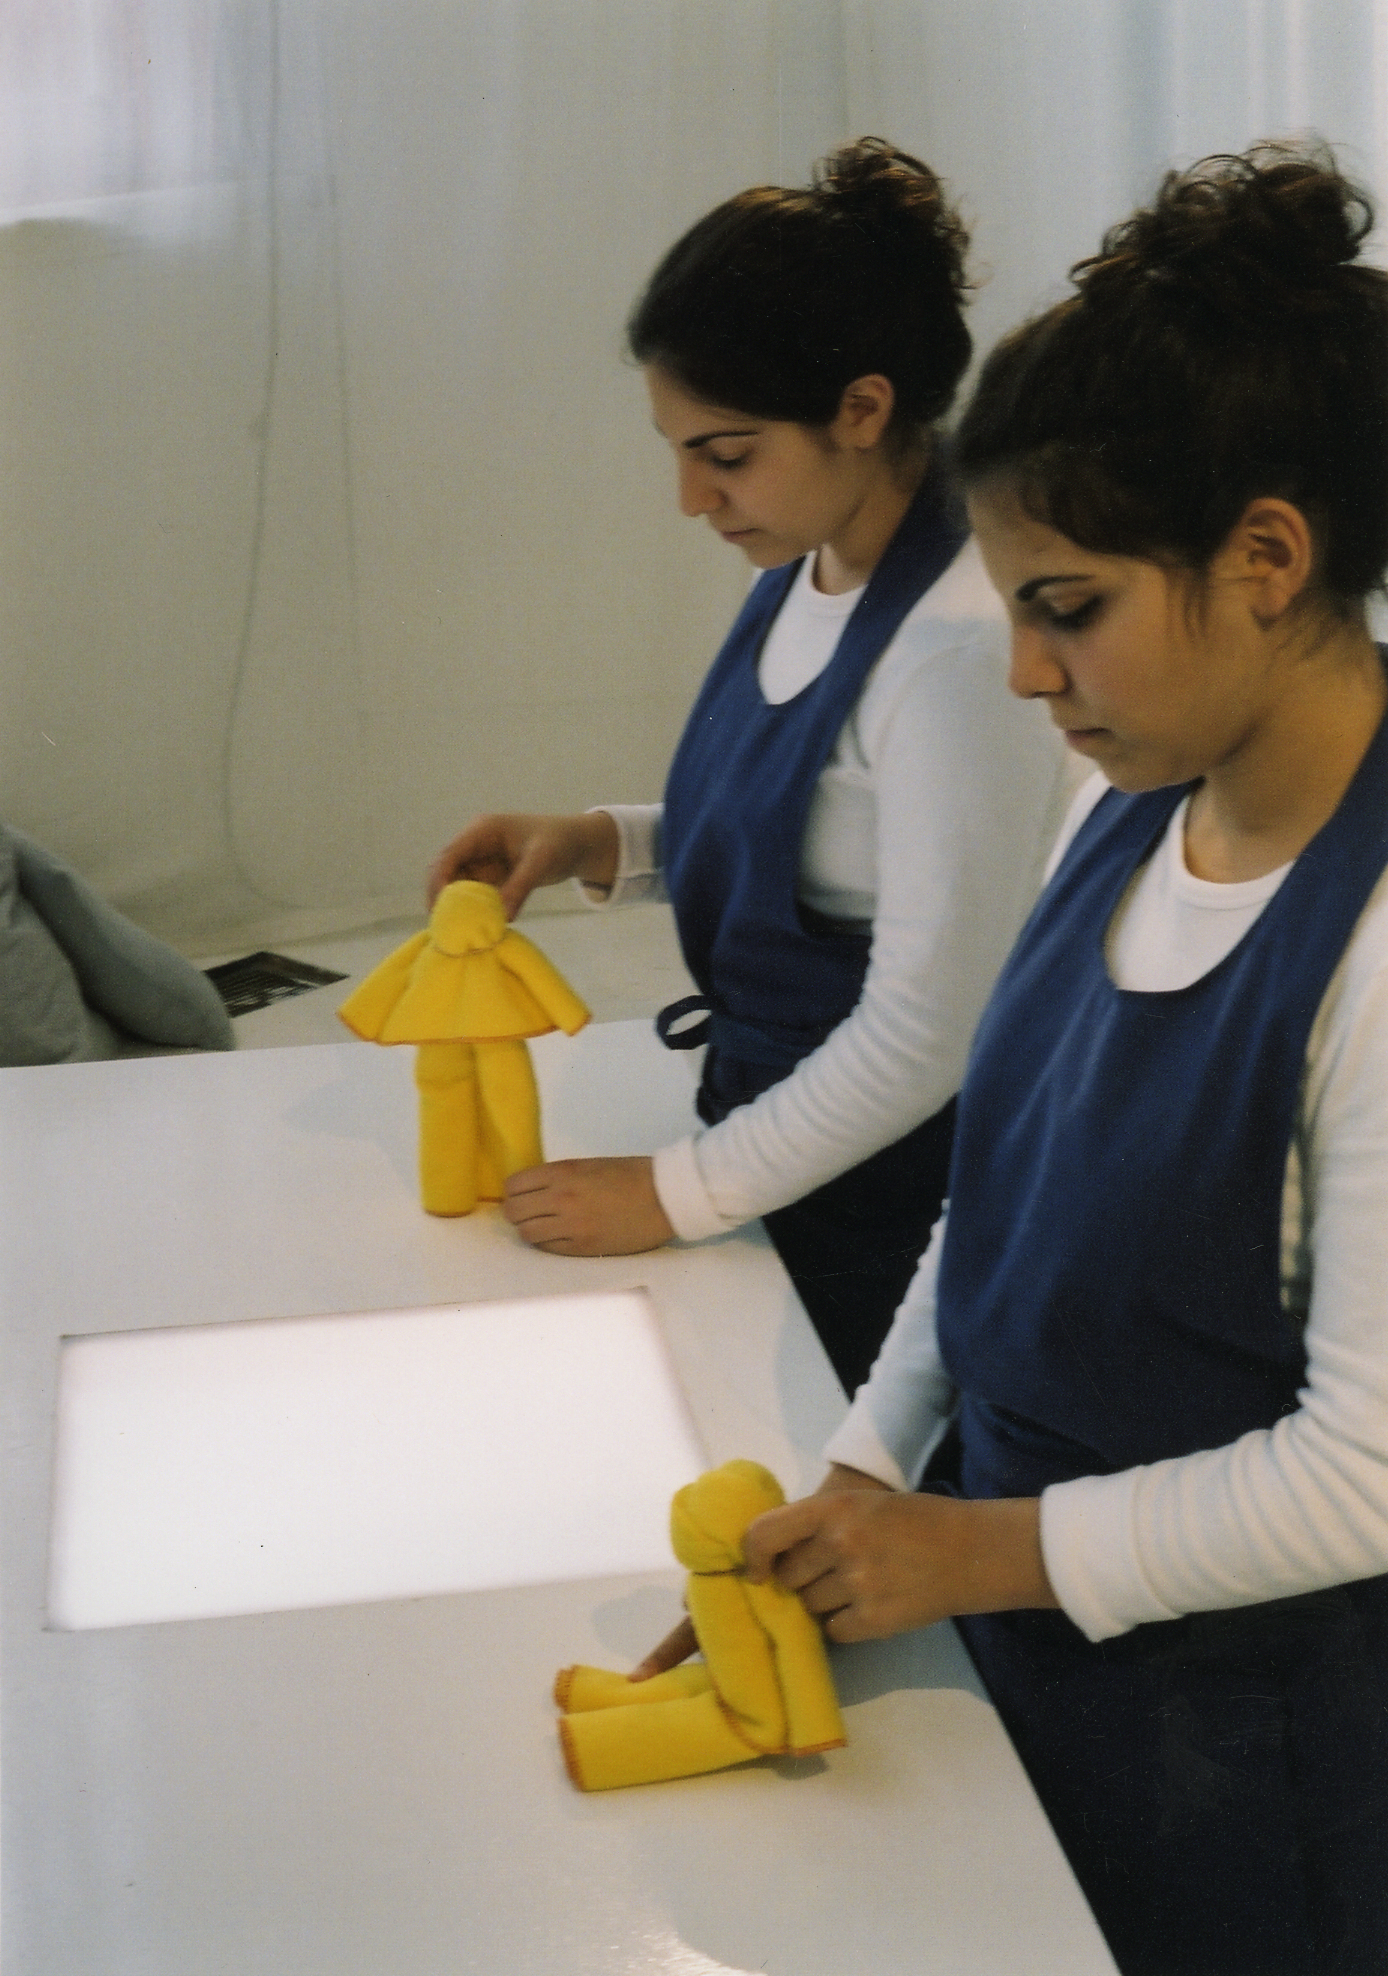 2 performers wearing blue aprons stand at a counter top each manipulating a small figure made out of a yellow duster.